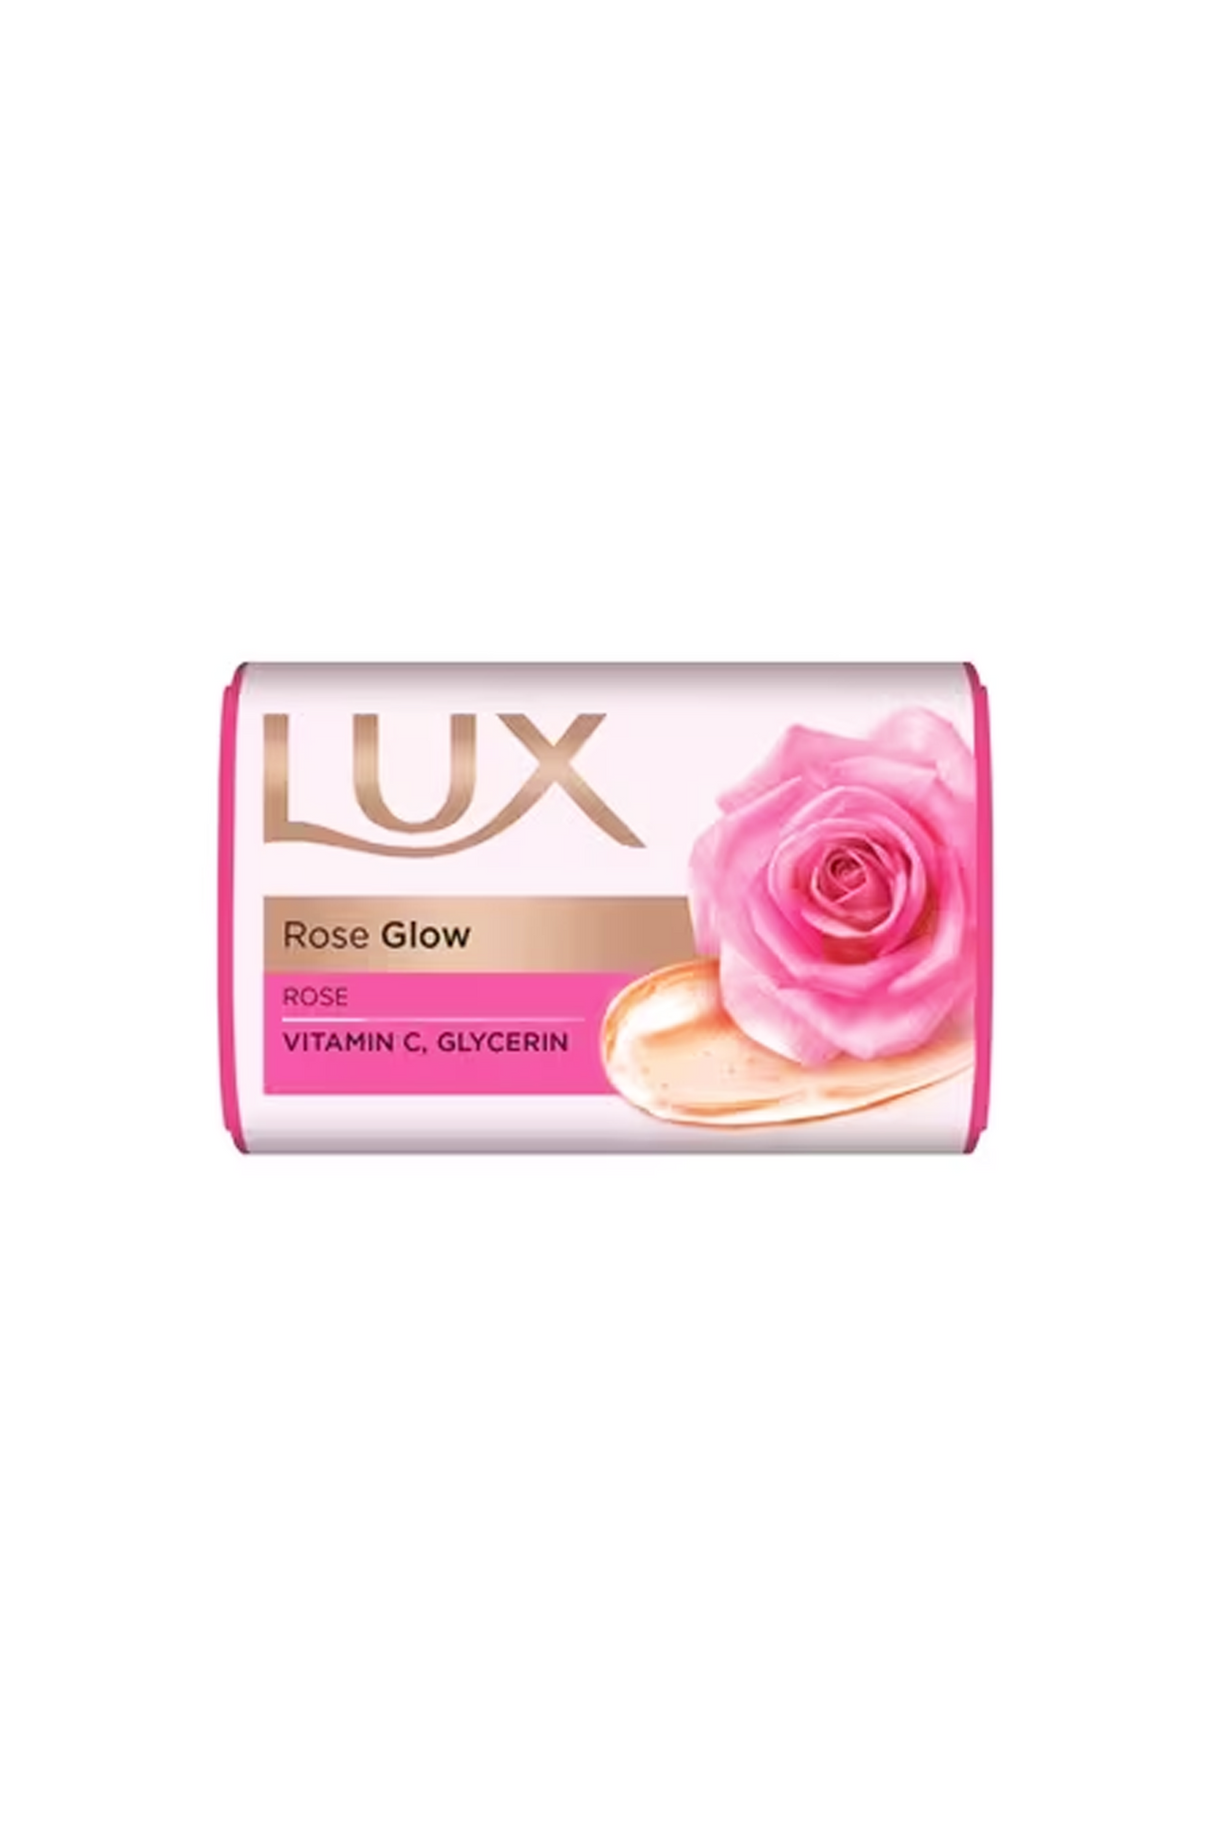 lux soap rose glow 98g